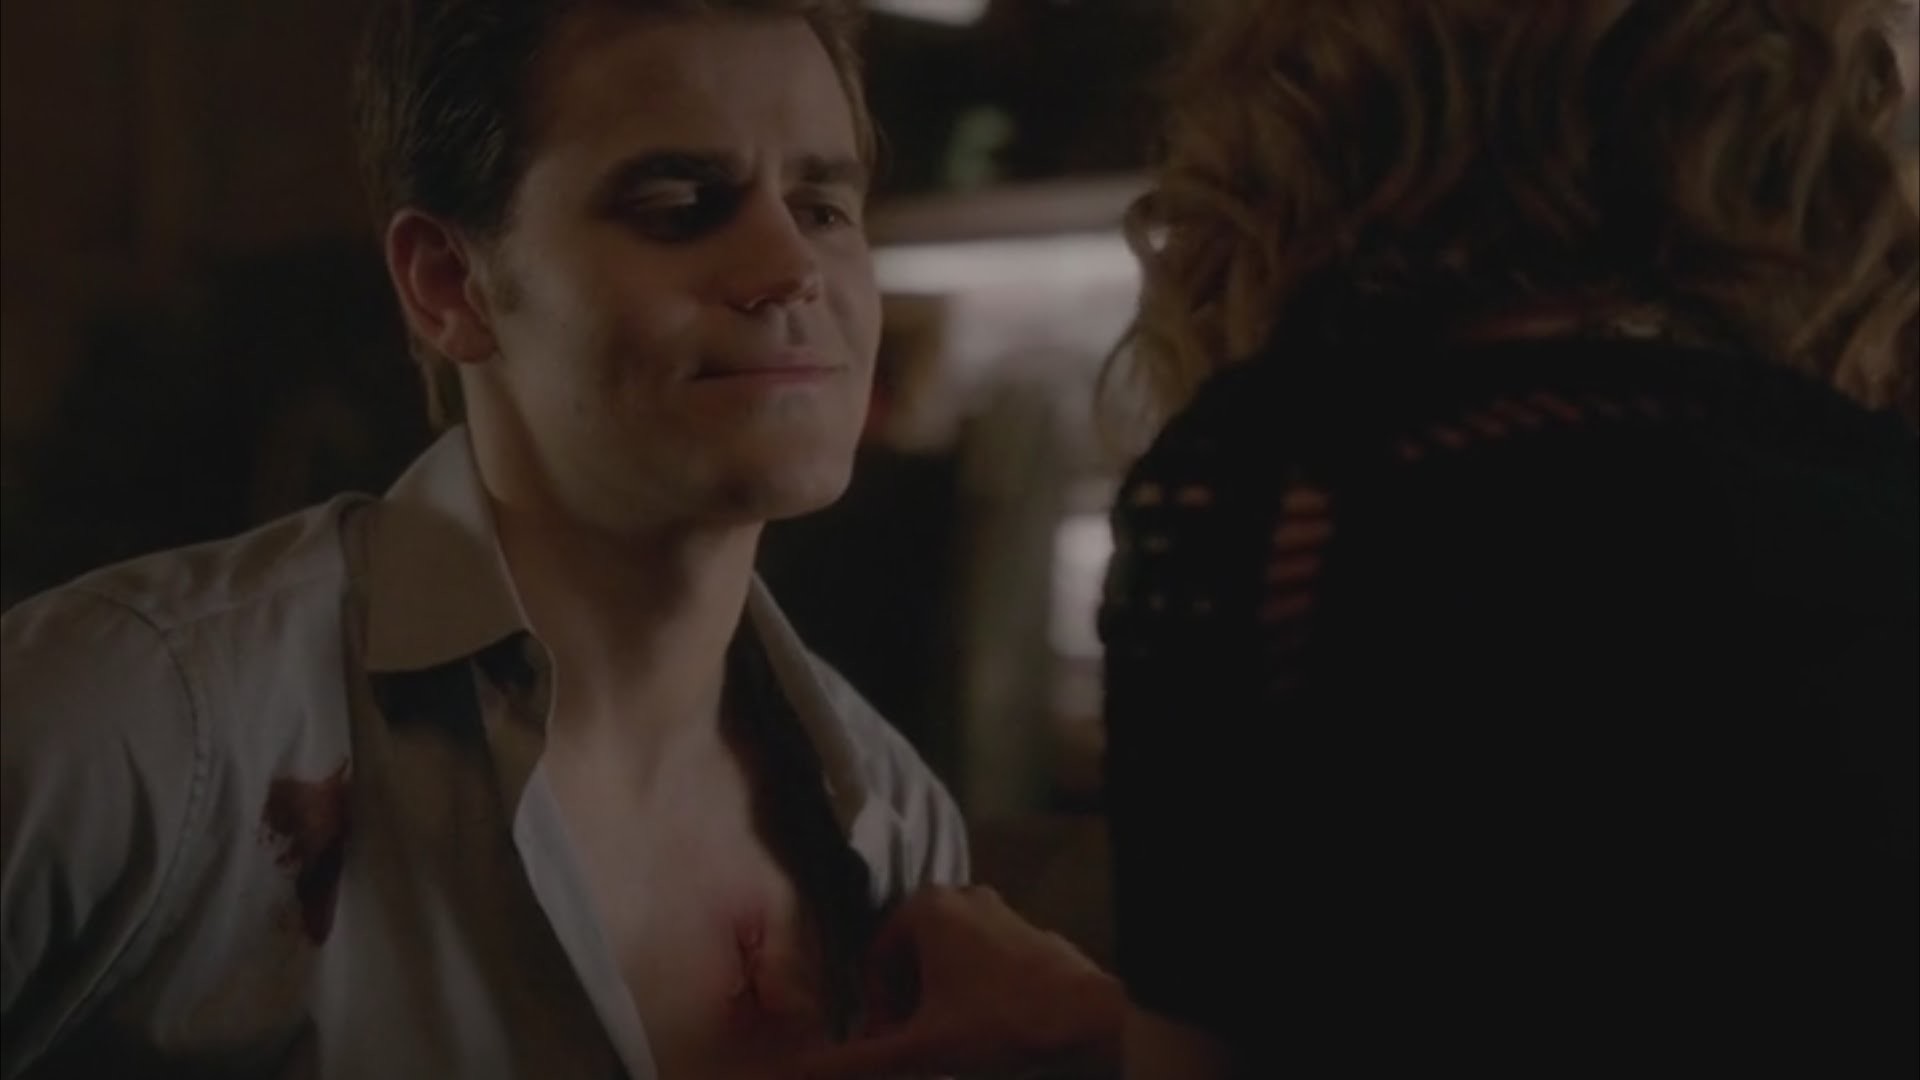 1920x1080 The Originals: 3x14 - Freya helps Stefan with the Rayna's mark [HD] -  YouTube